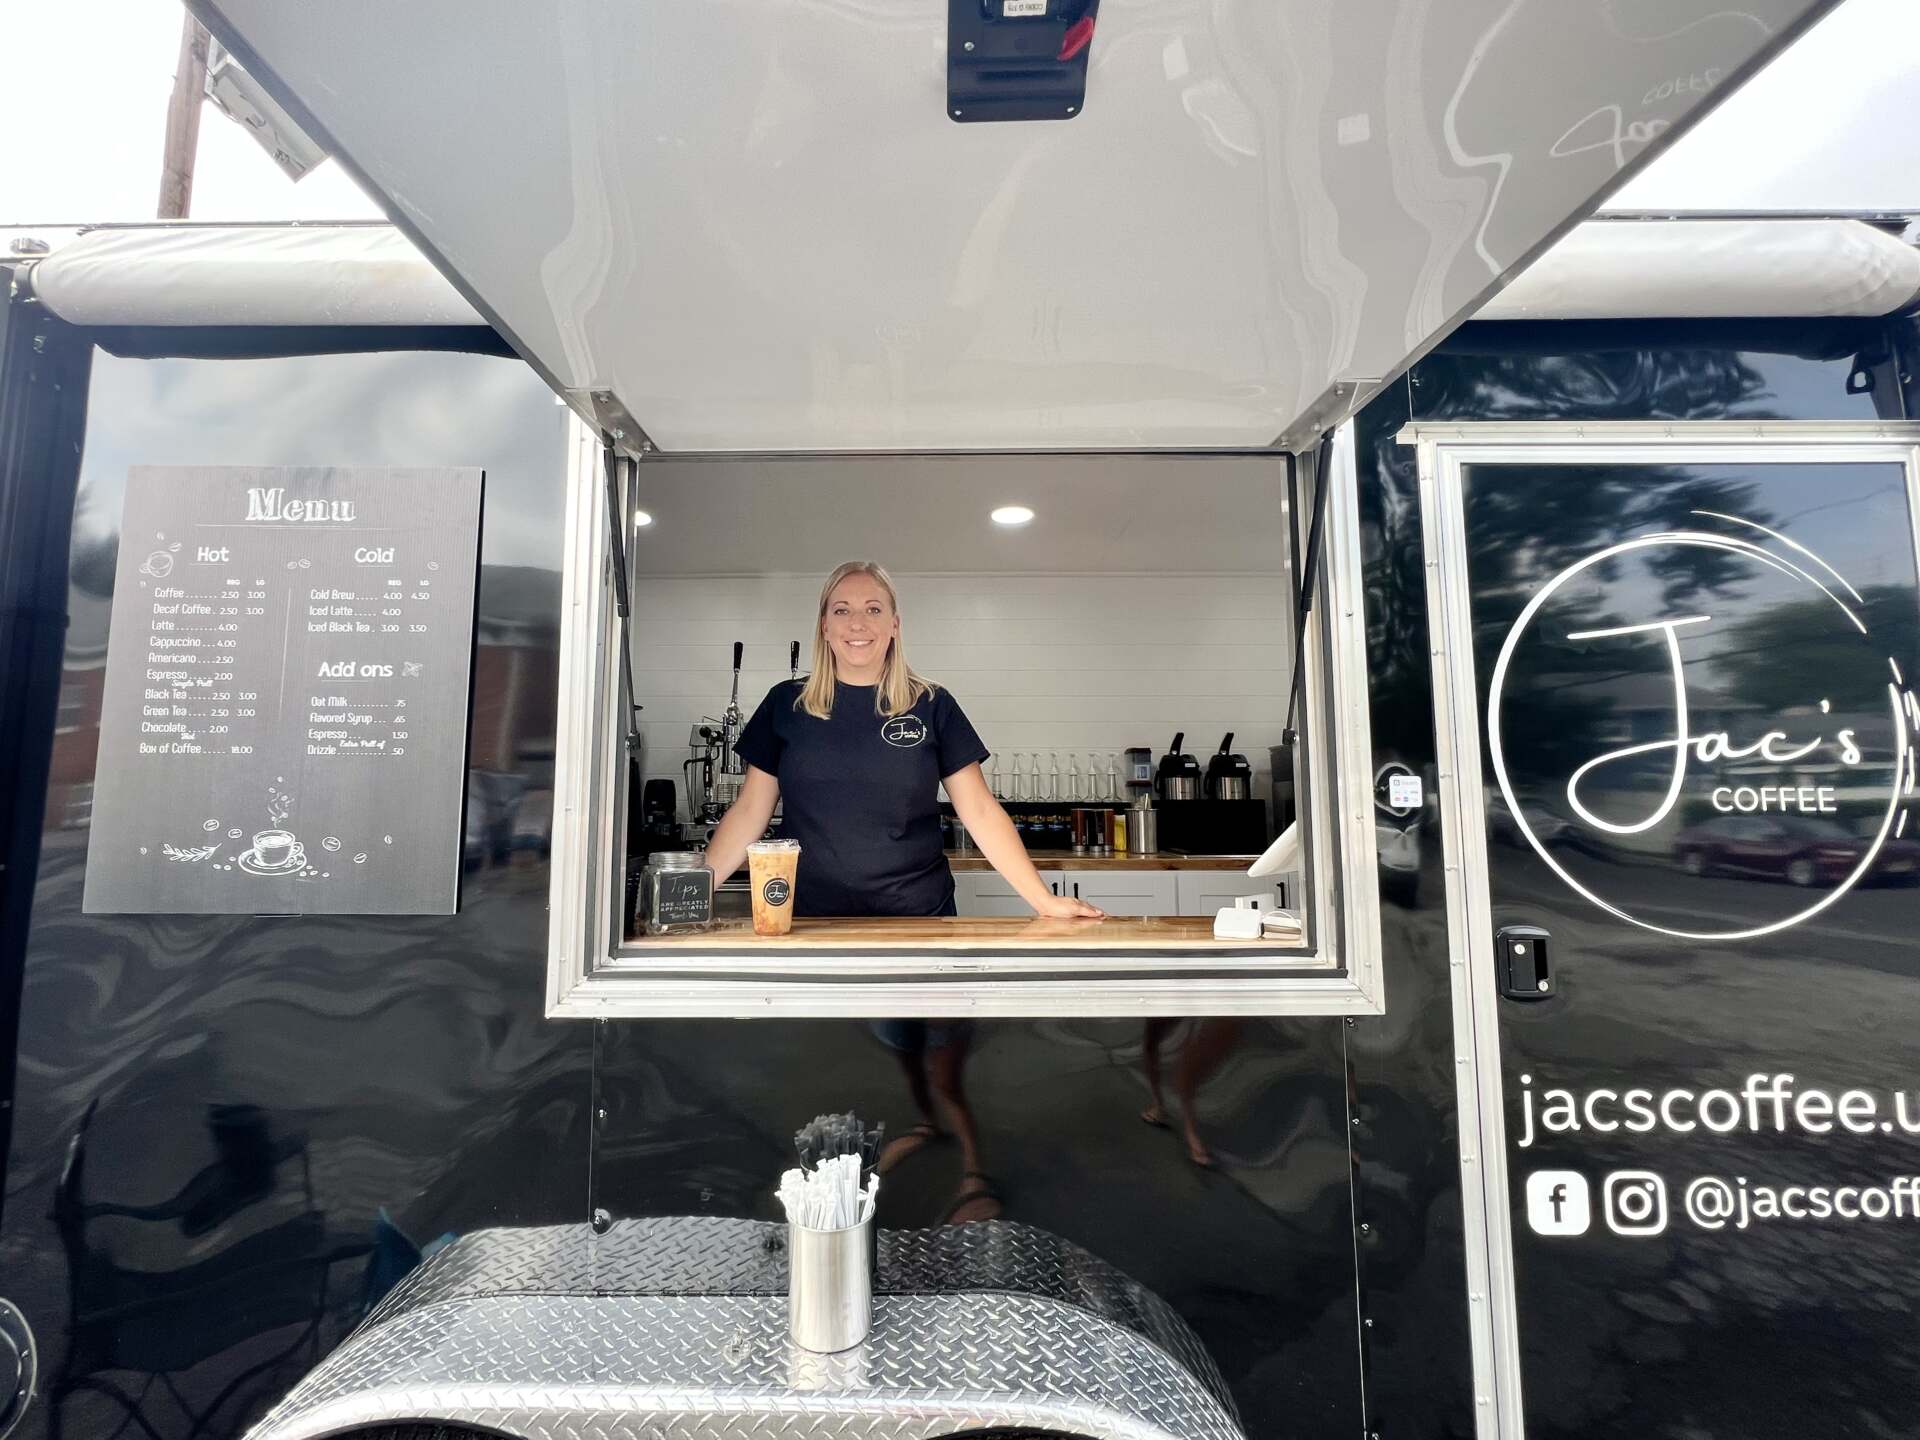 Jac's Coffee Truck, Jac’s Coffee Truck is Uniting Coffee Lovers in the Kenilworth, NJ Area!